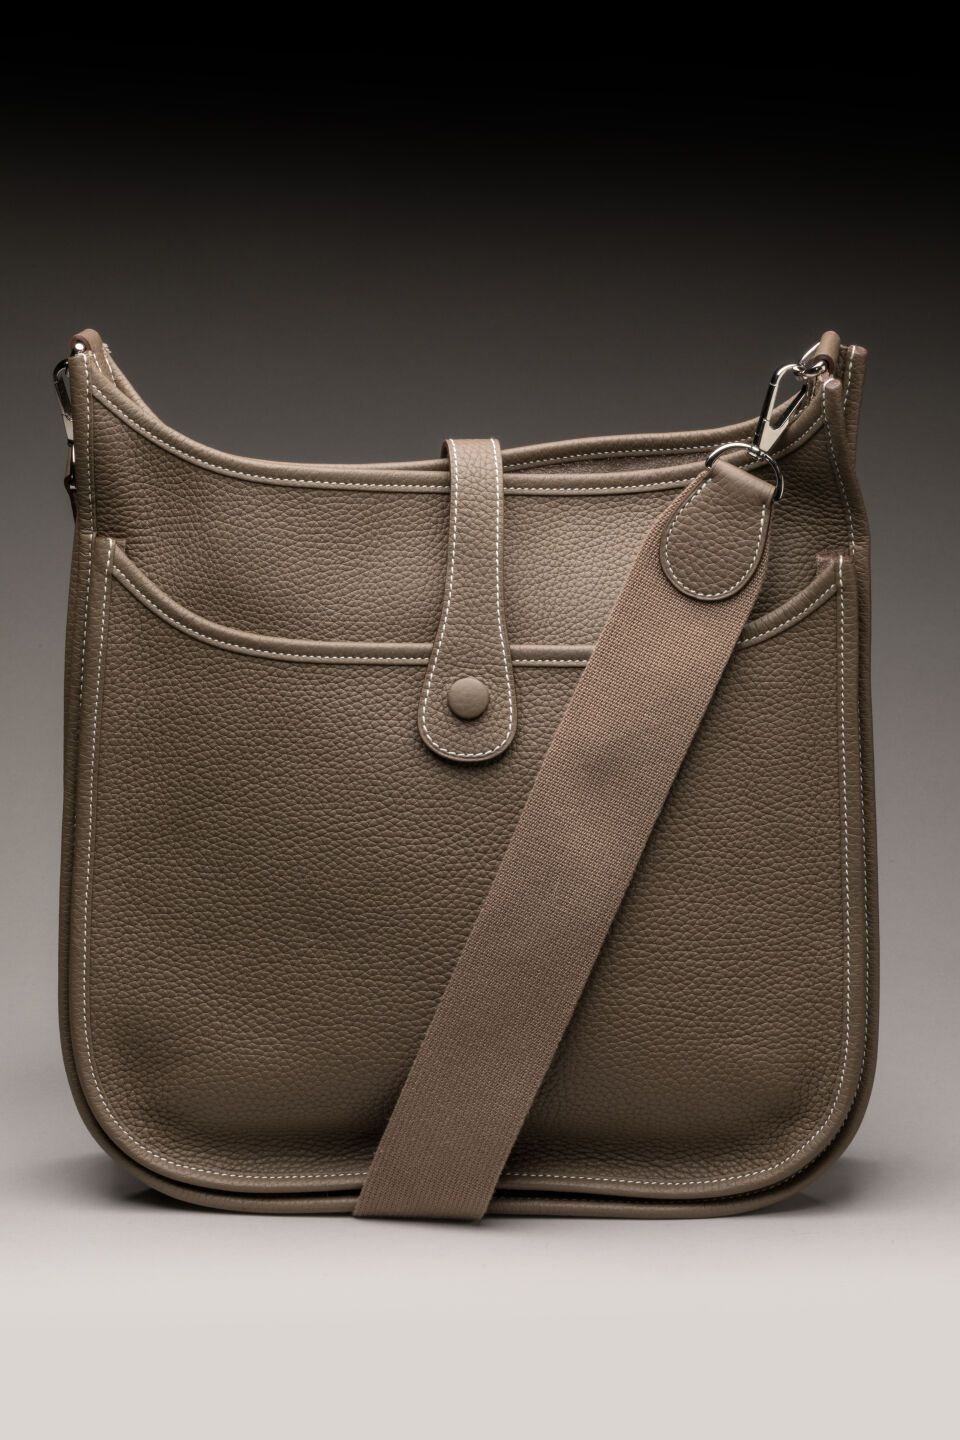 Null HERMES Paris - "Evelyne II" model BAG in taupe-colored clémence leather, si&hellip;